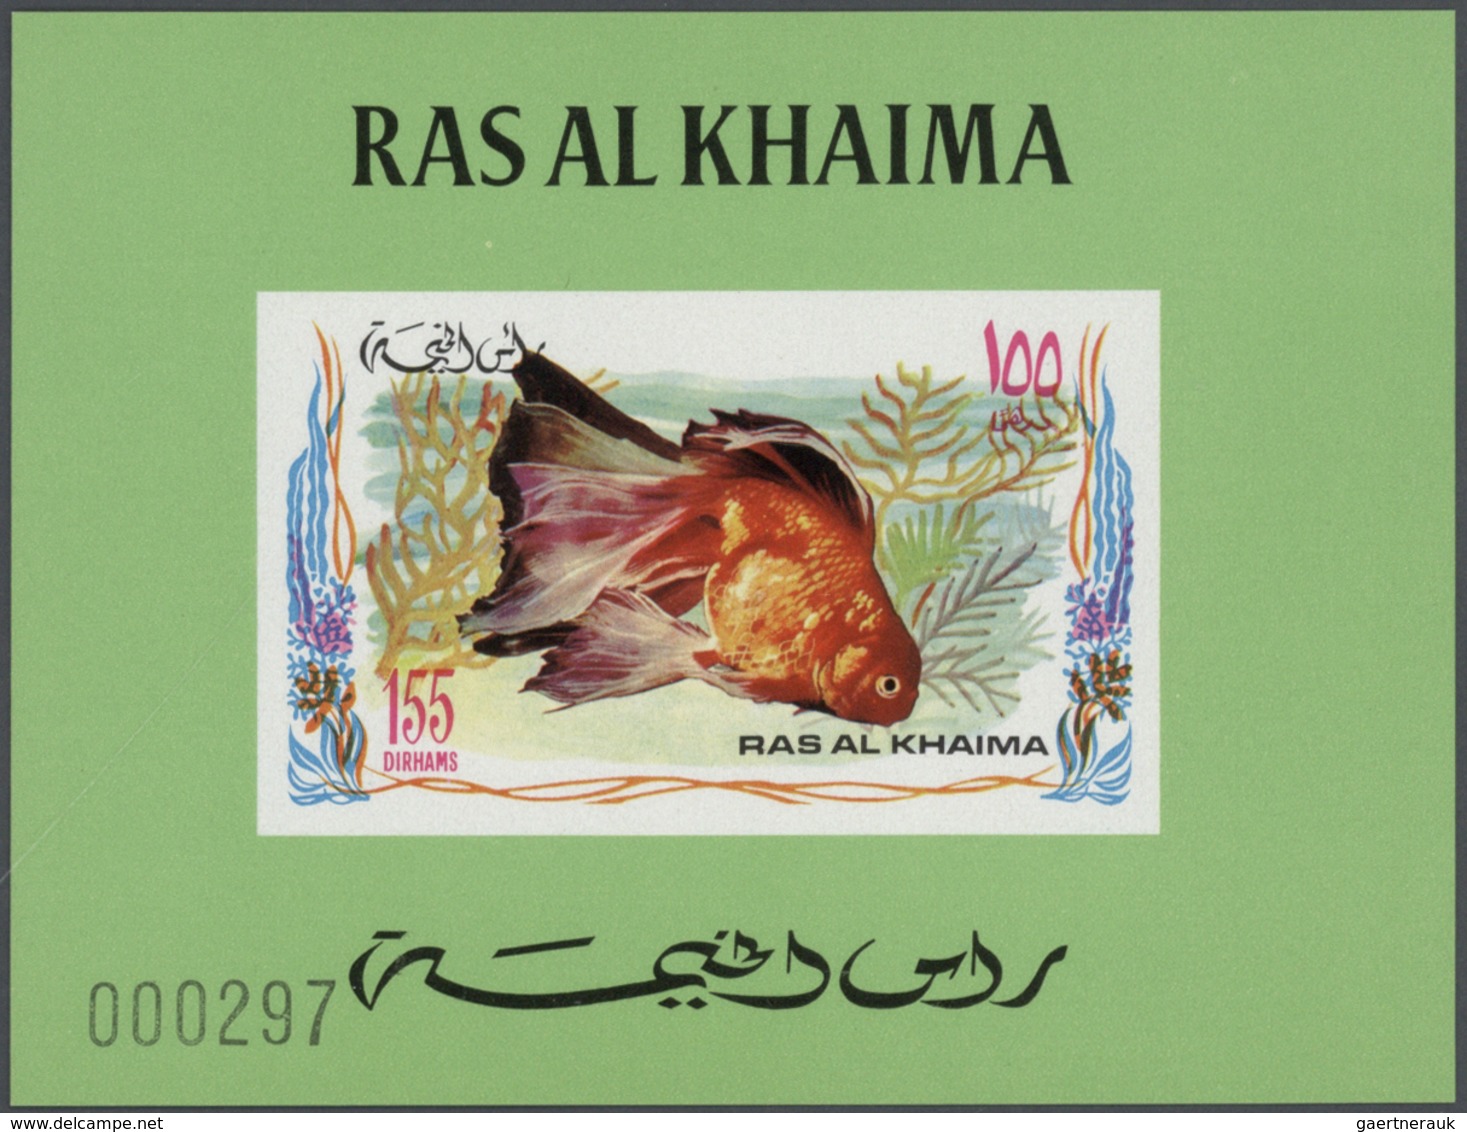 Ras al Khaima: 1972, u/m collection in a thick stockbook with attractive thematic issues like Birds,